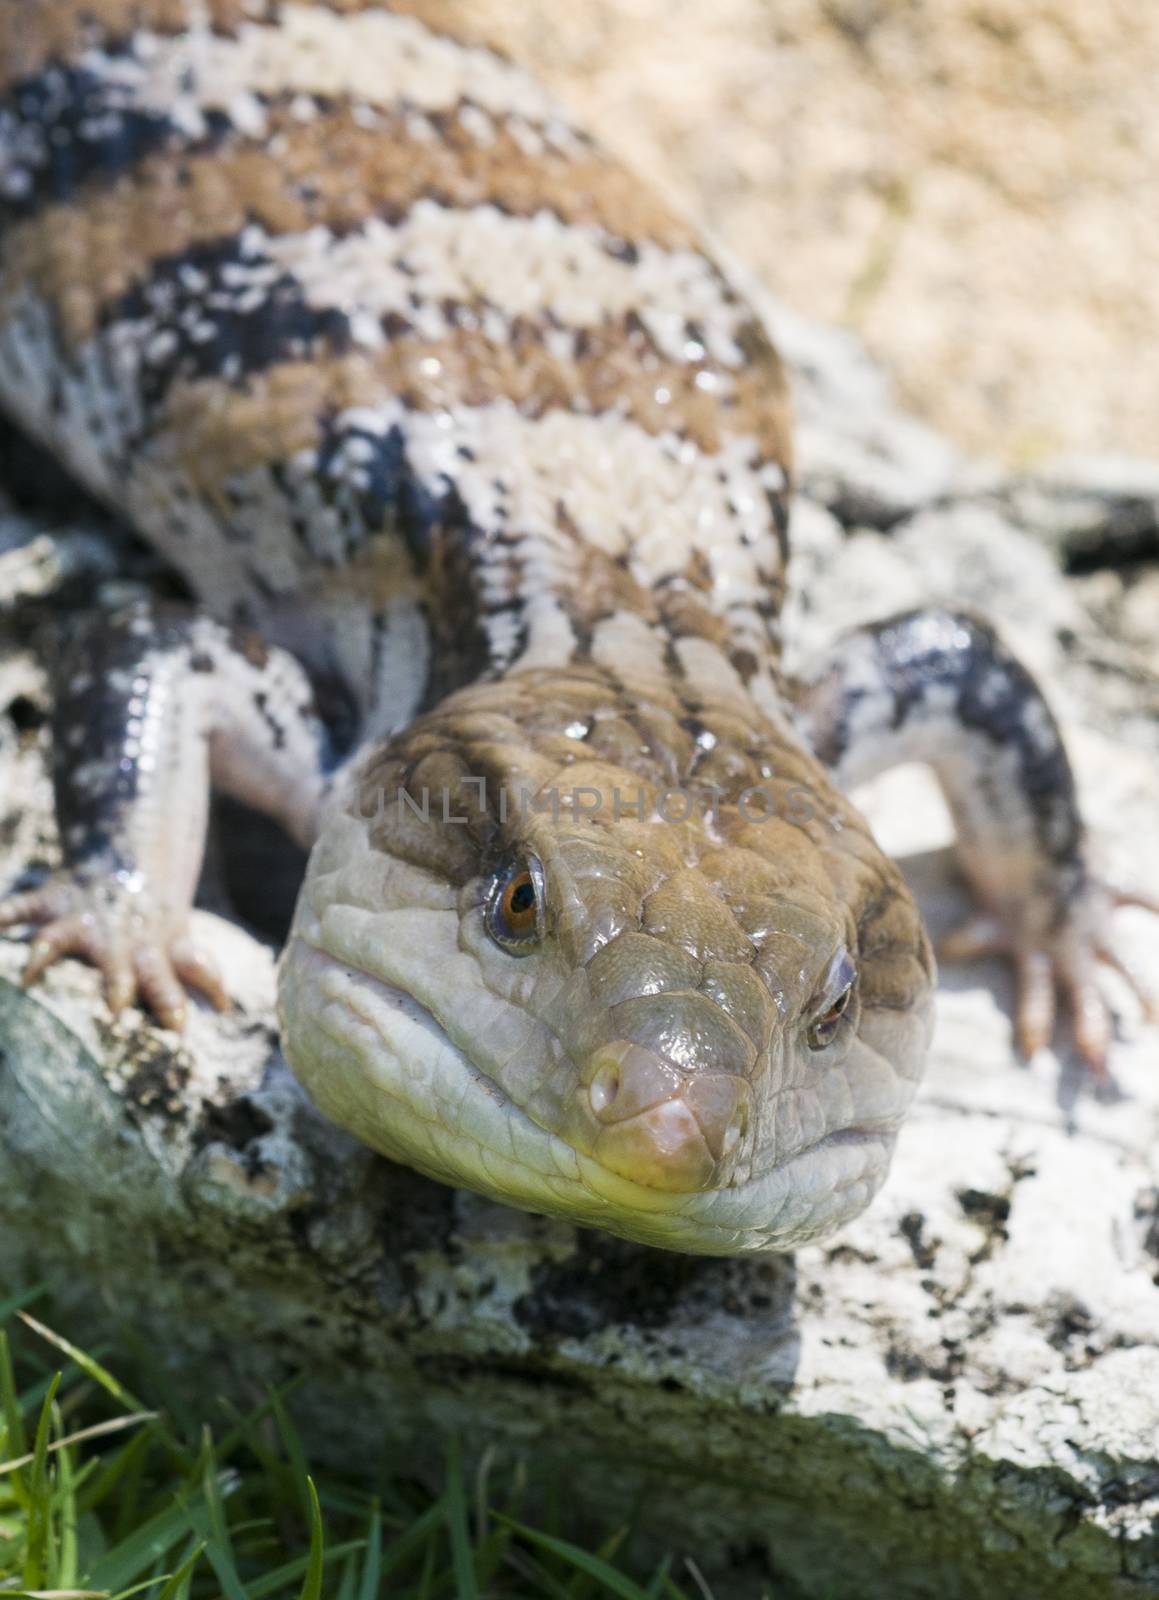 Blue-tongued skink or Blue-tongued Lizard